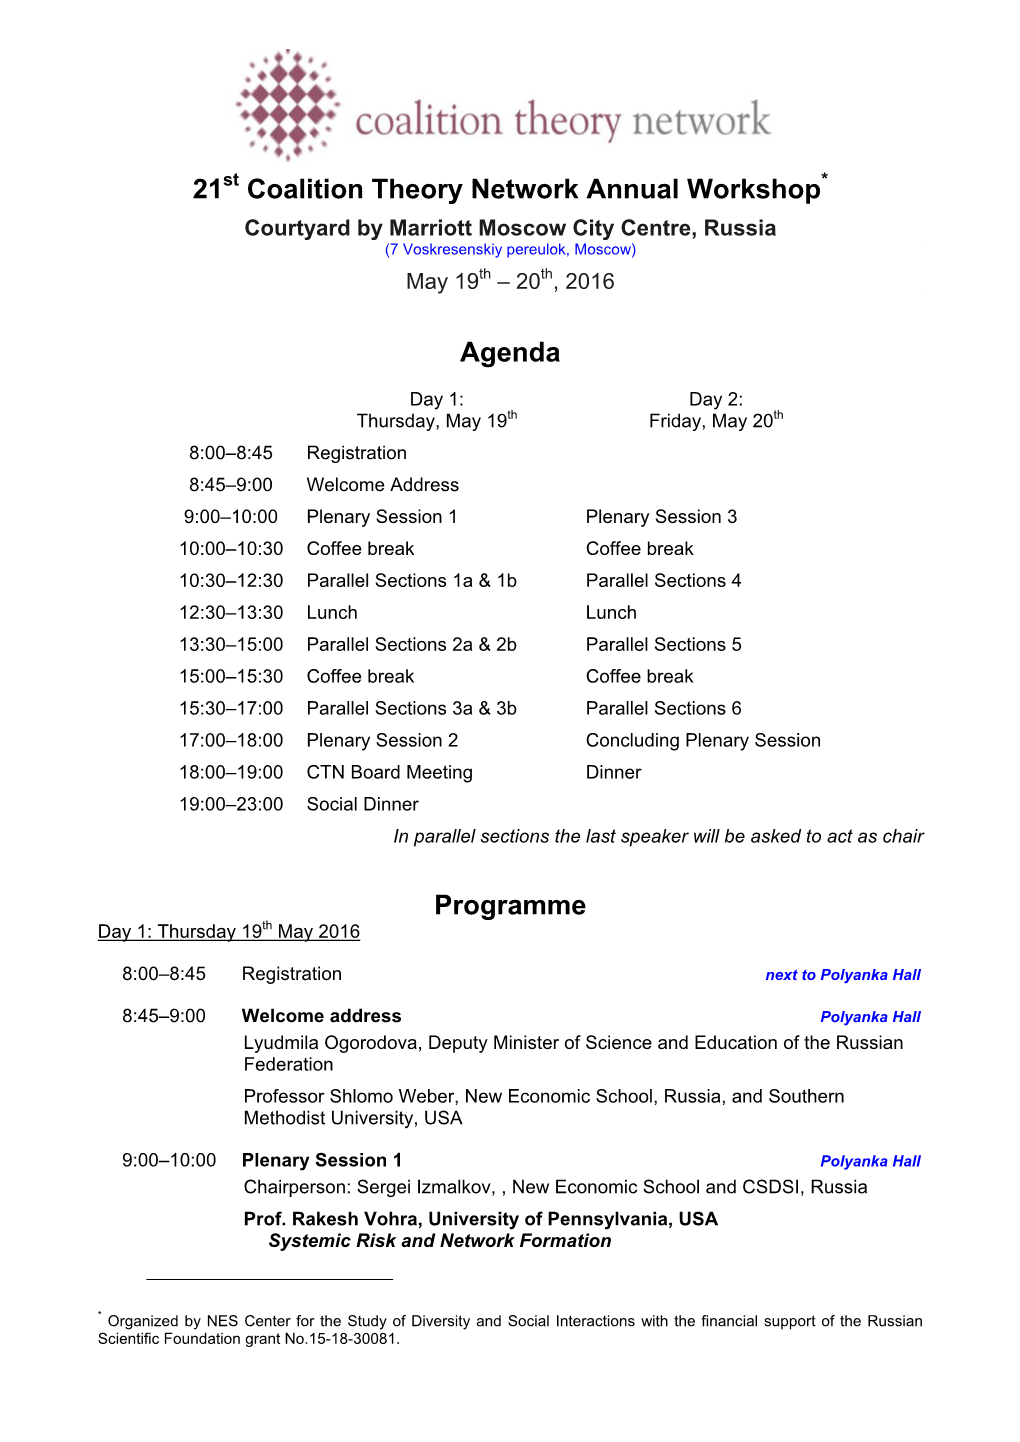 21 Coalition Theory Network Annual Workshop Agenda Programme